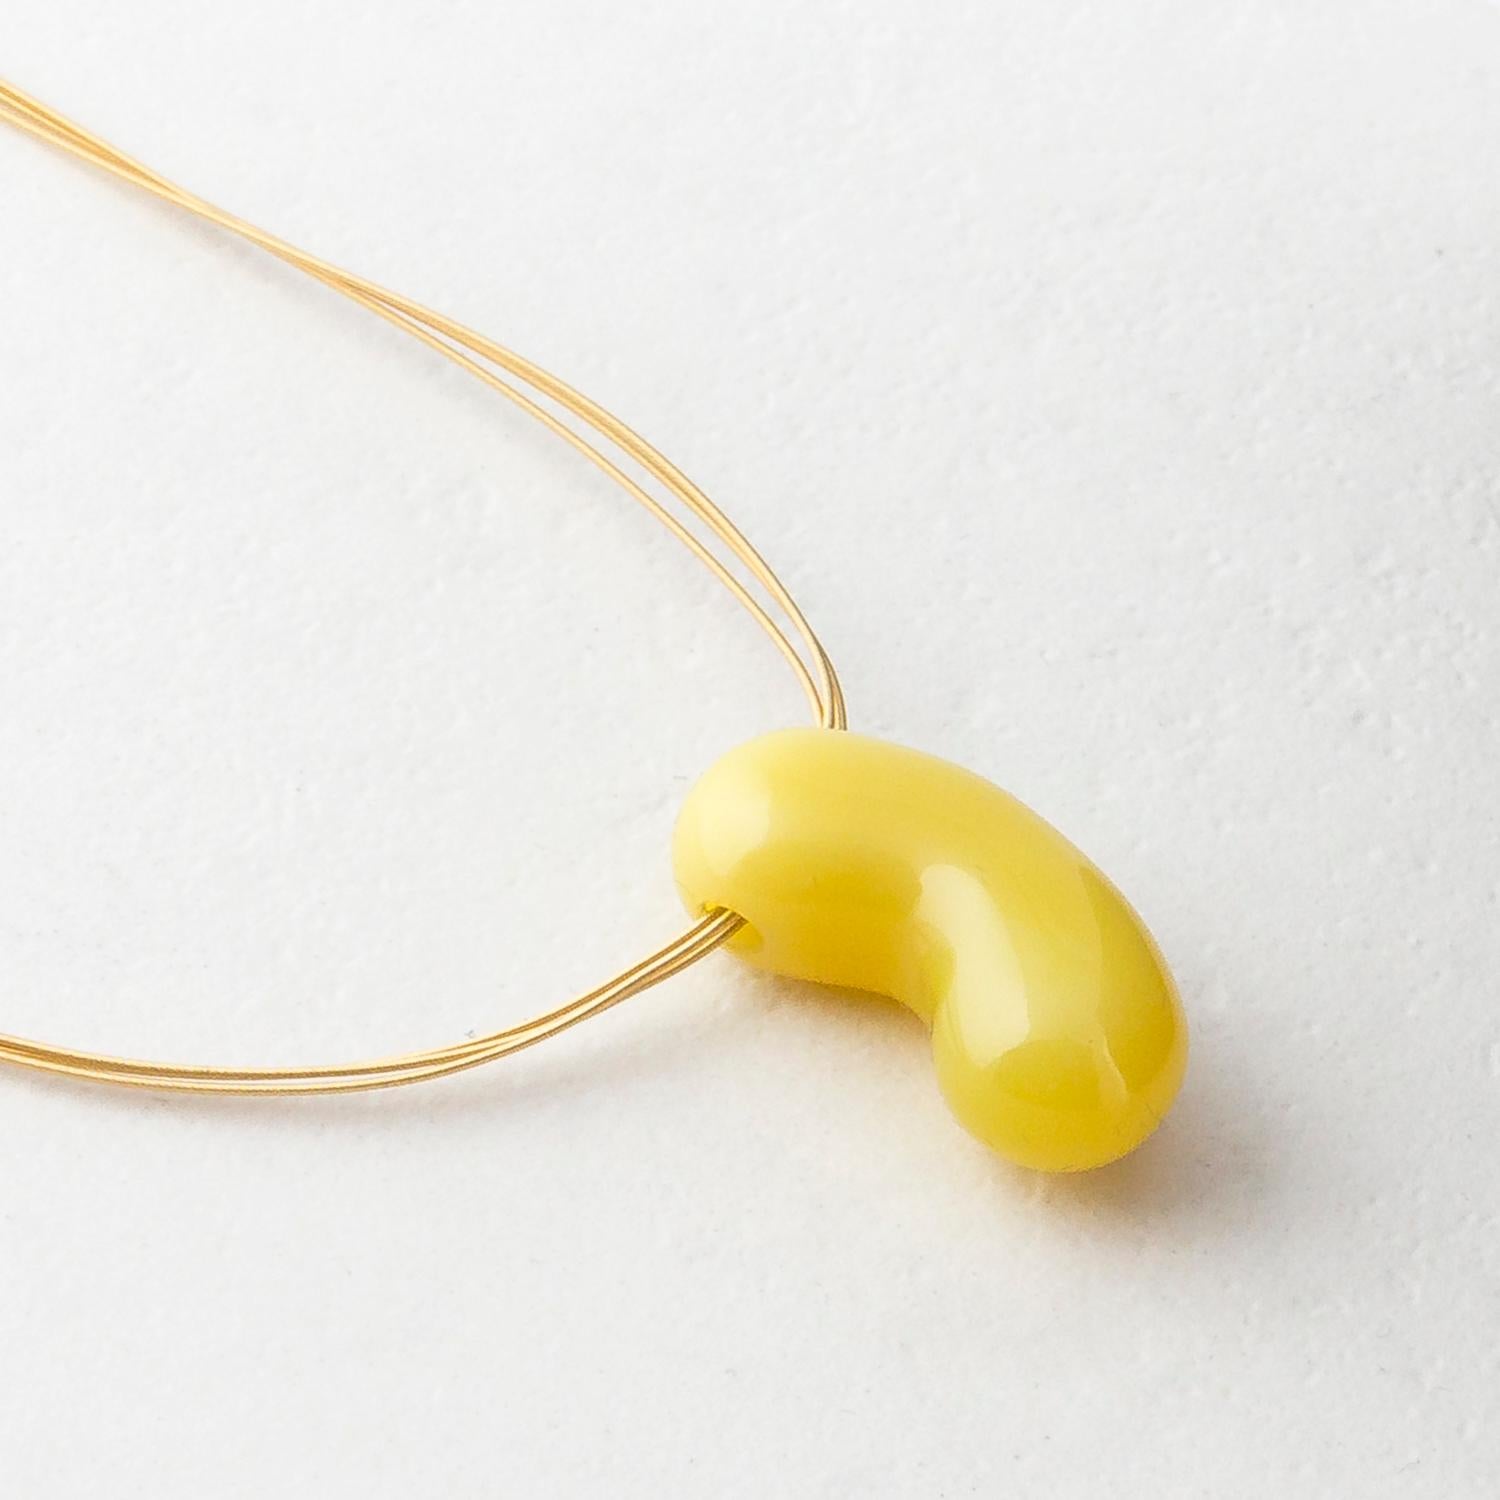 Hand-carved by Dieter Lorenz, one of the top names in contemporary gem-carving, this yellow agate jellybean pendant is hung on an 18 Karat Yellow Gold multi strand necklace.

Made by hand in our family run Northern Irish jewellery workshop. Inspired